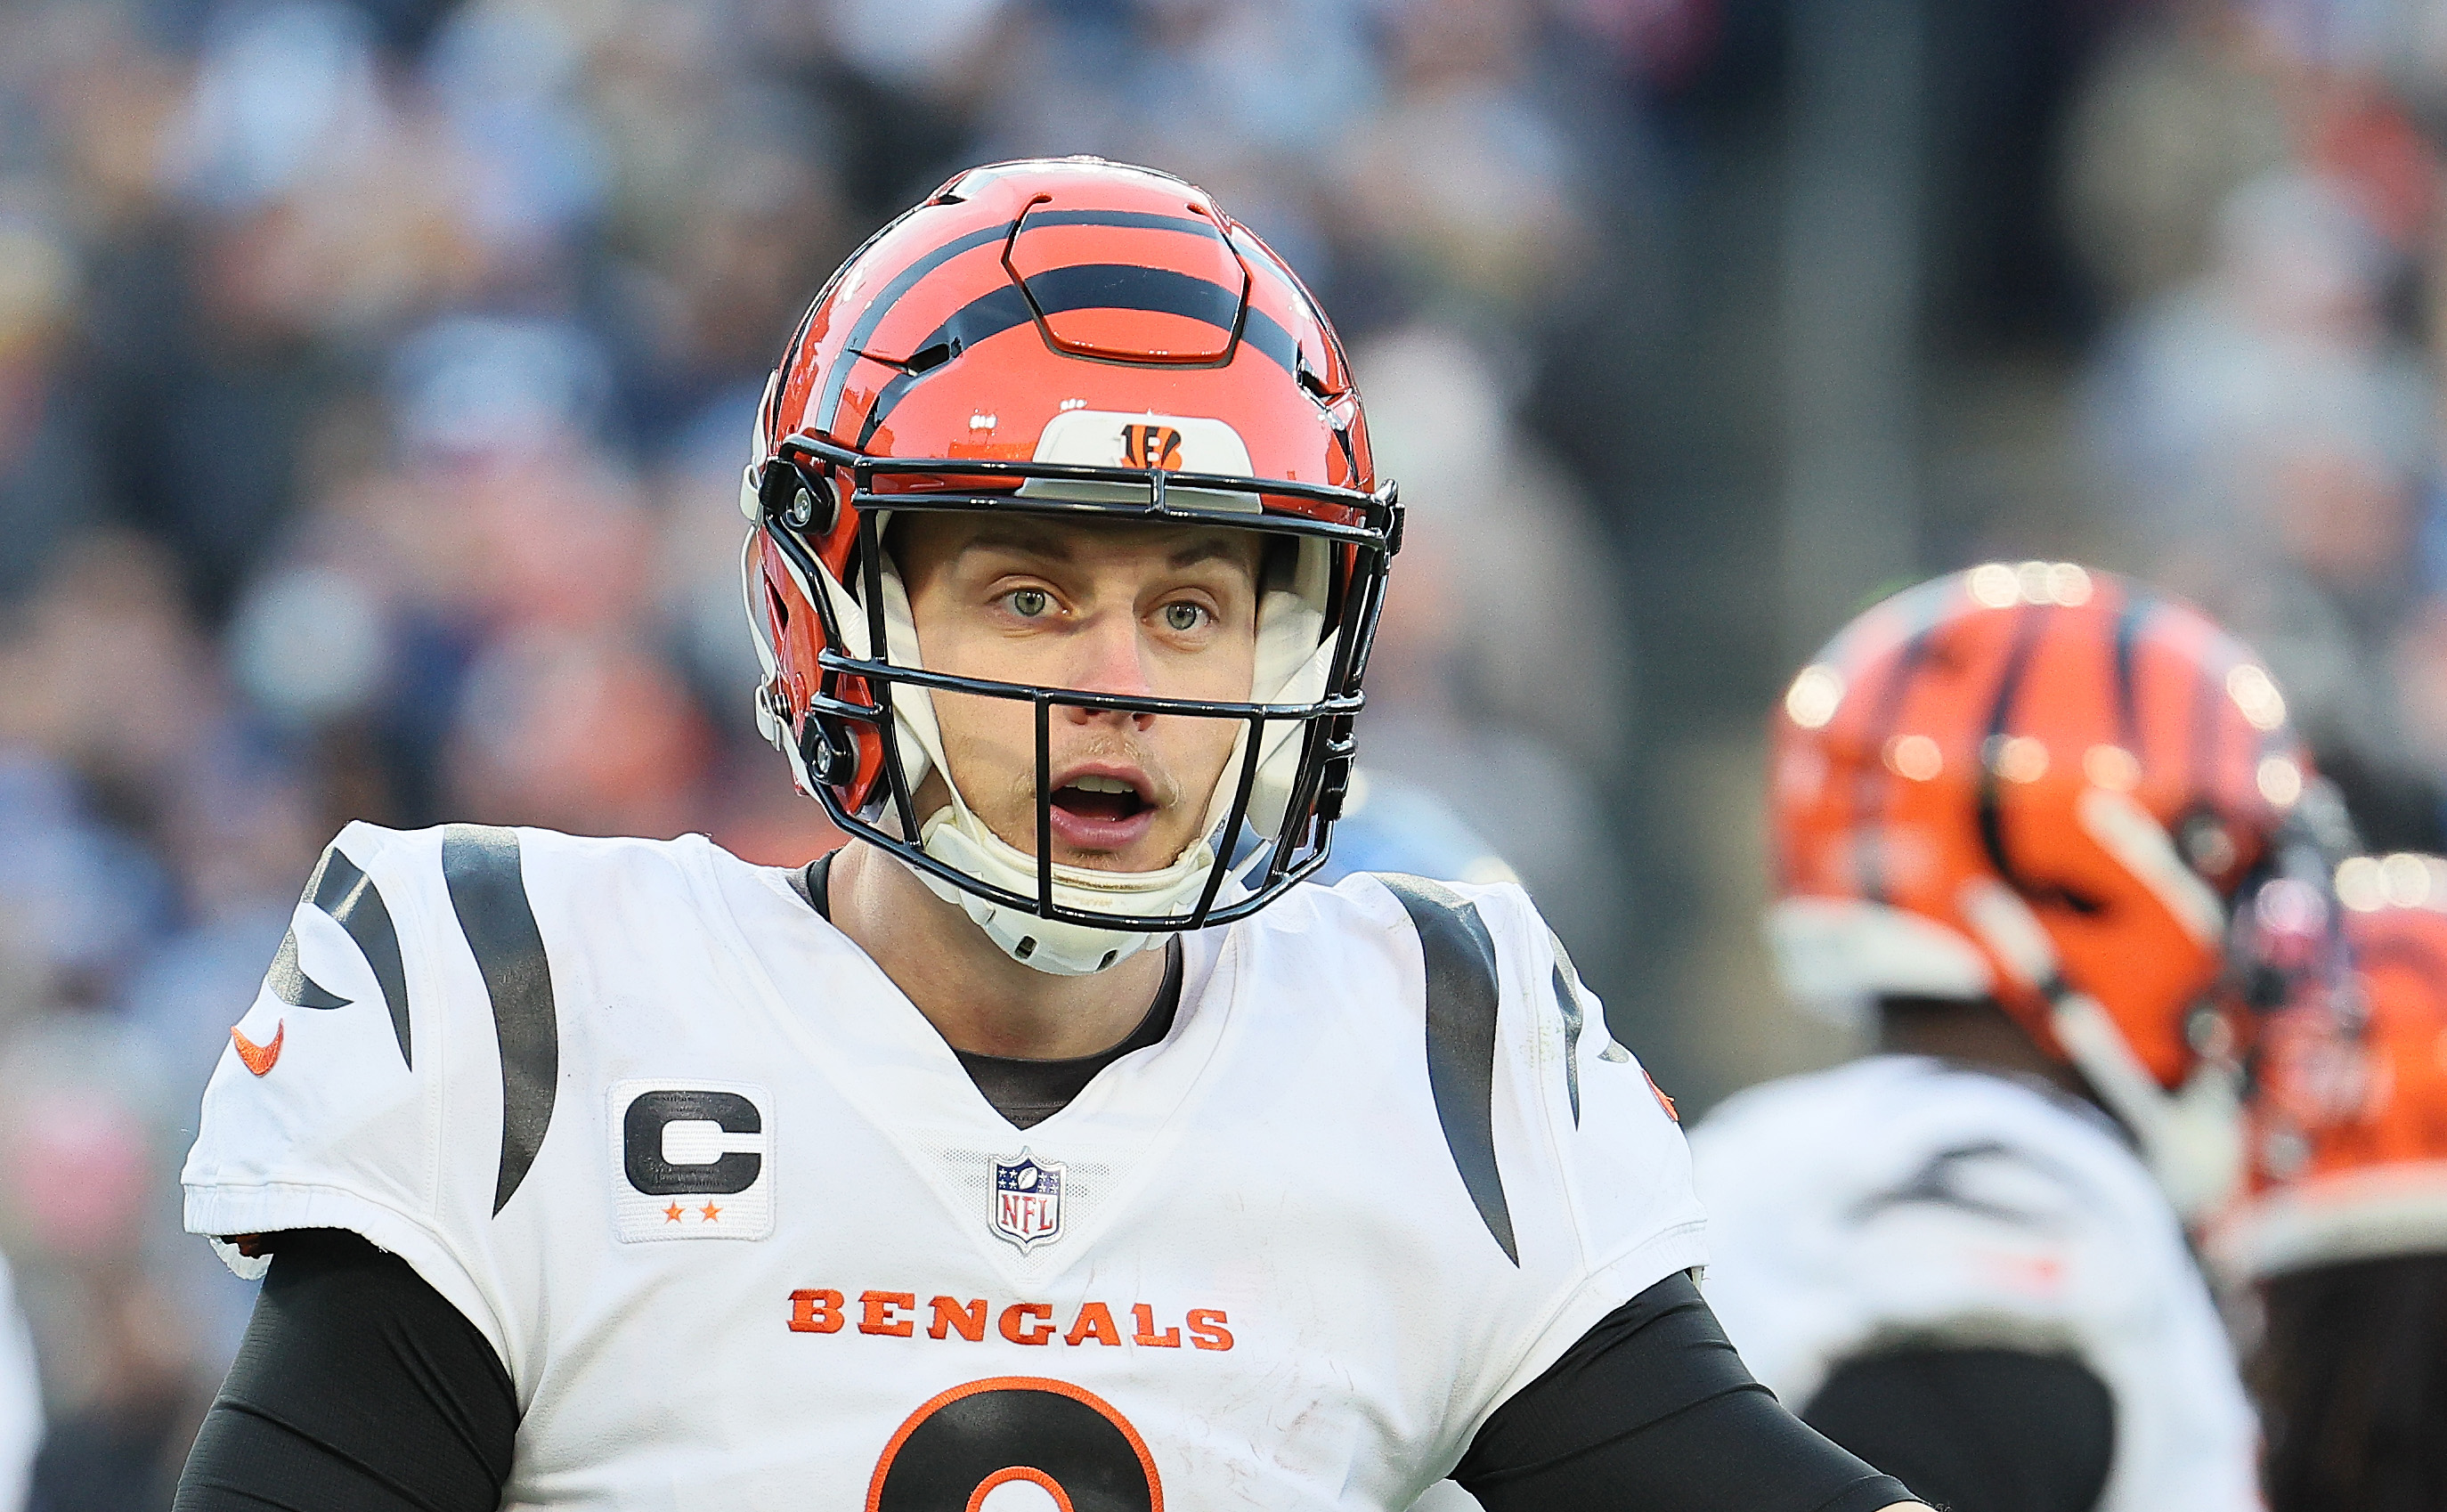 Bengals vs Chiefs Point Spread, Over/Under, Moneyline and Betting Trends for AFC Championship Game on FanDuel